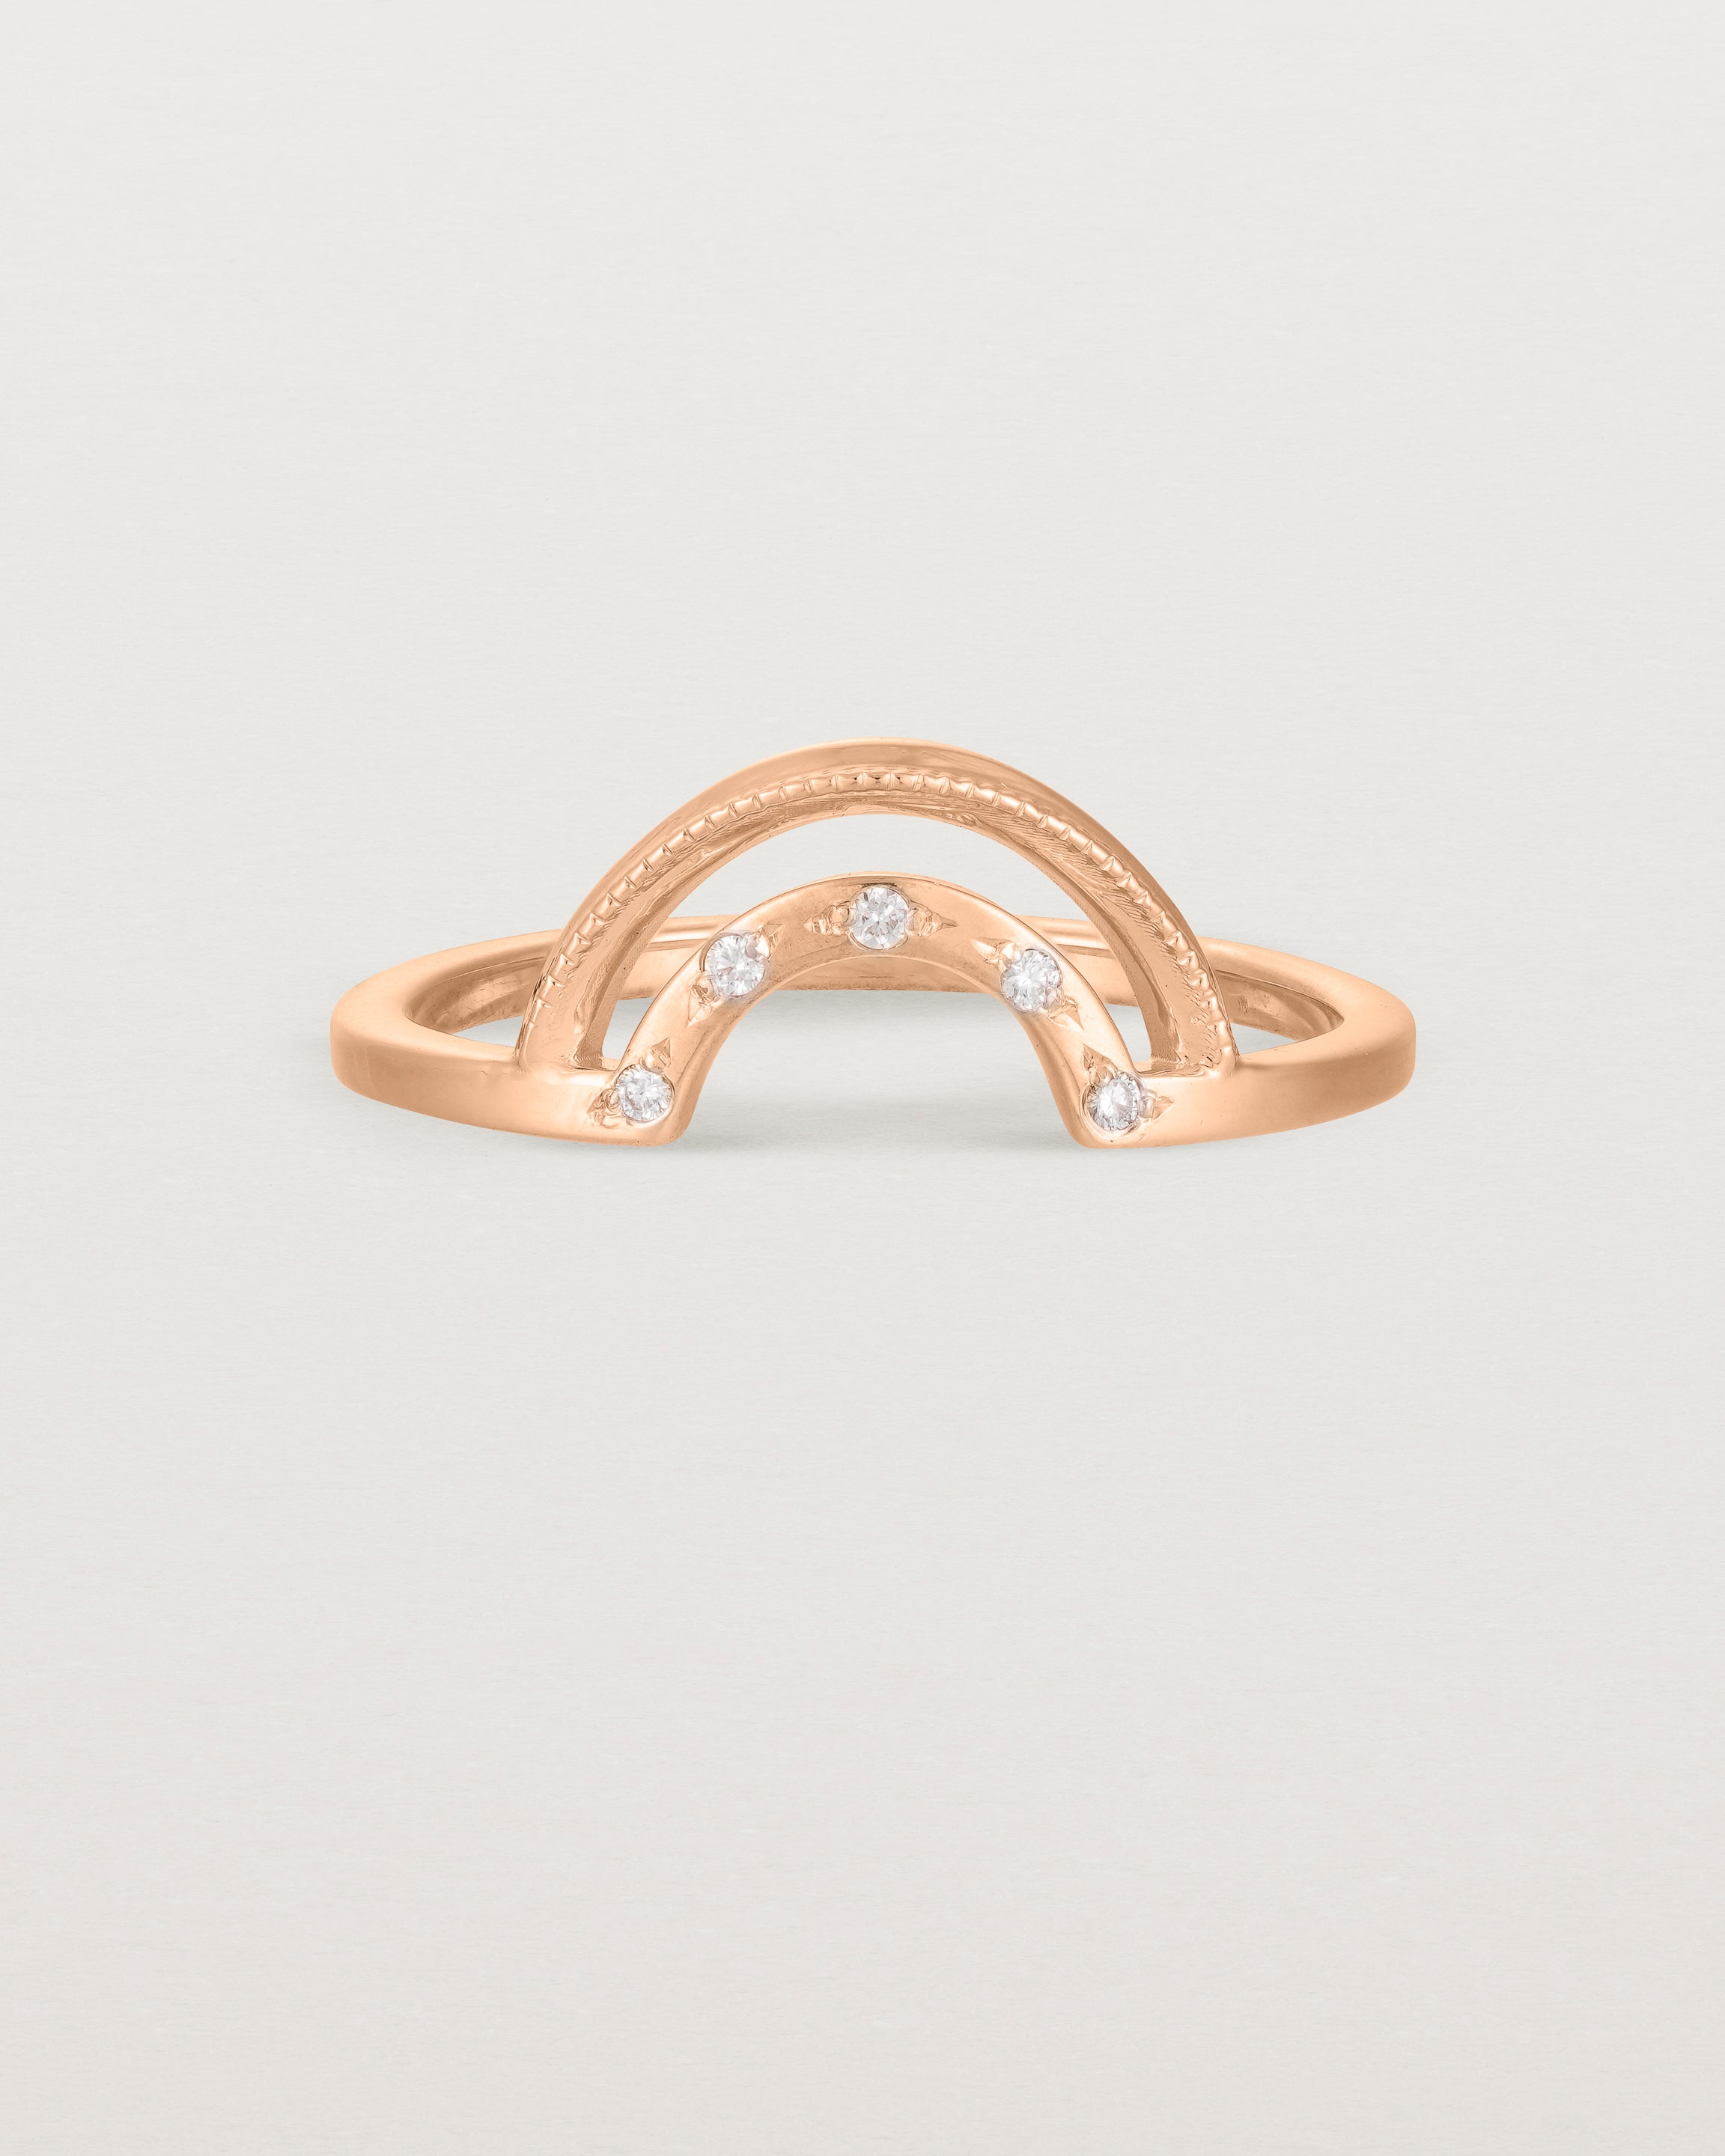 Fit two of a double arc crown ring with white diamonds adoring the inner arc - crafted in rose gold. 